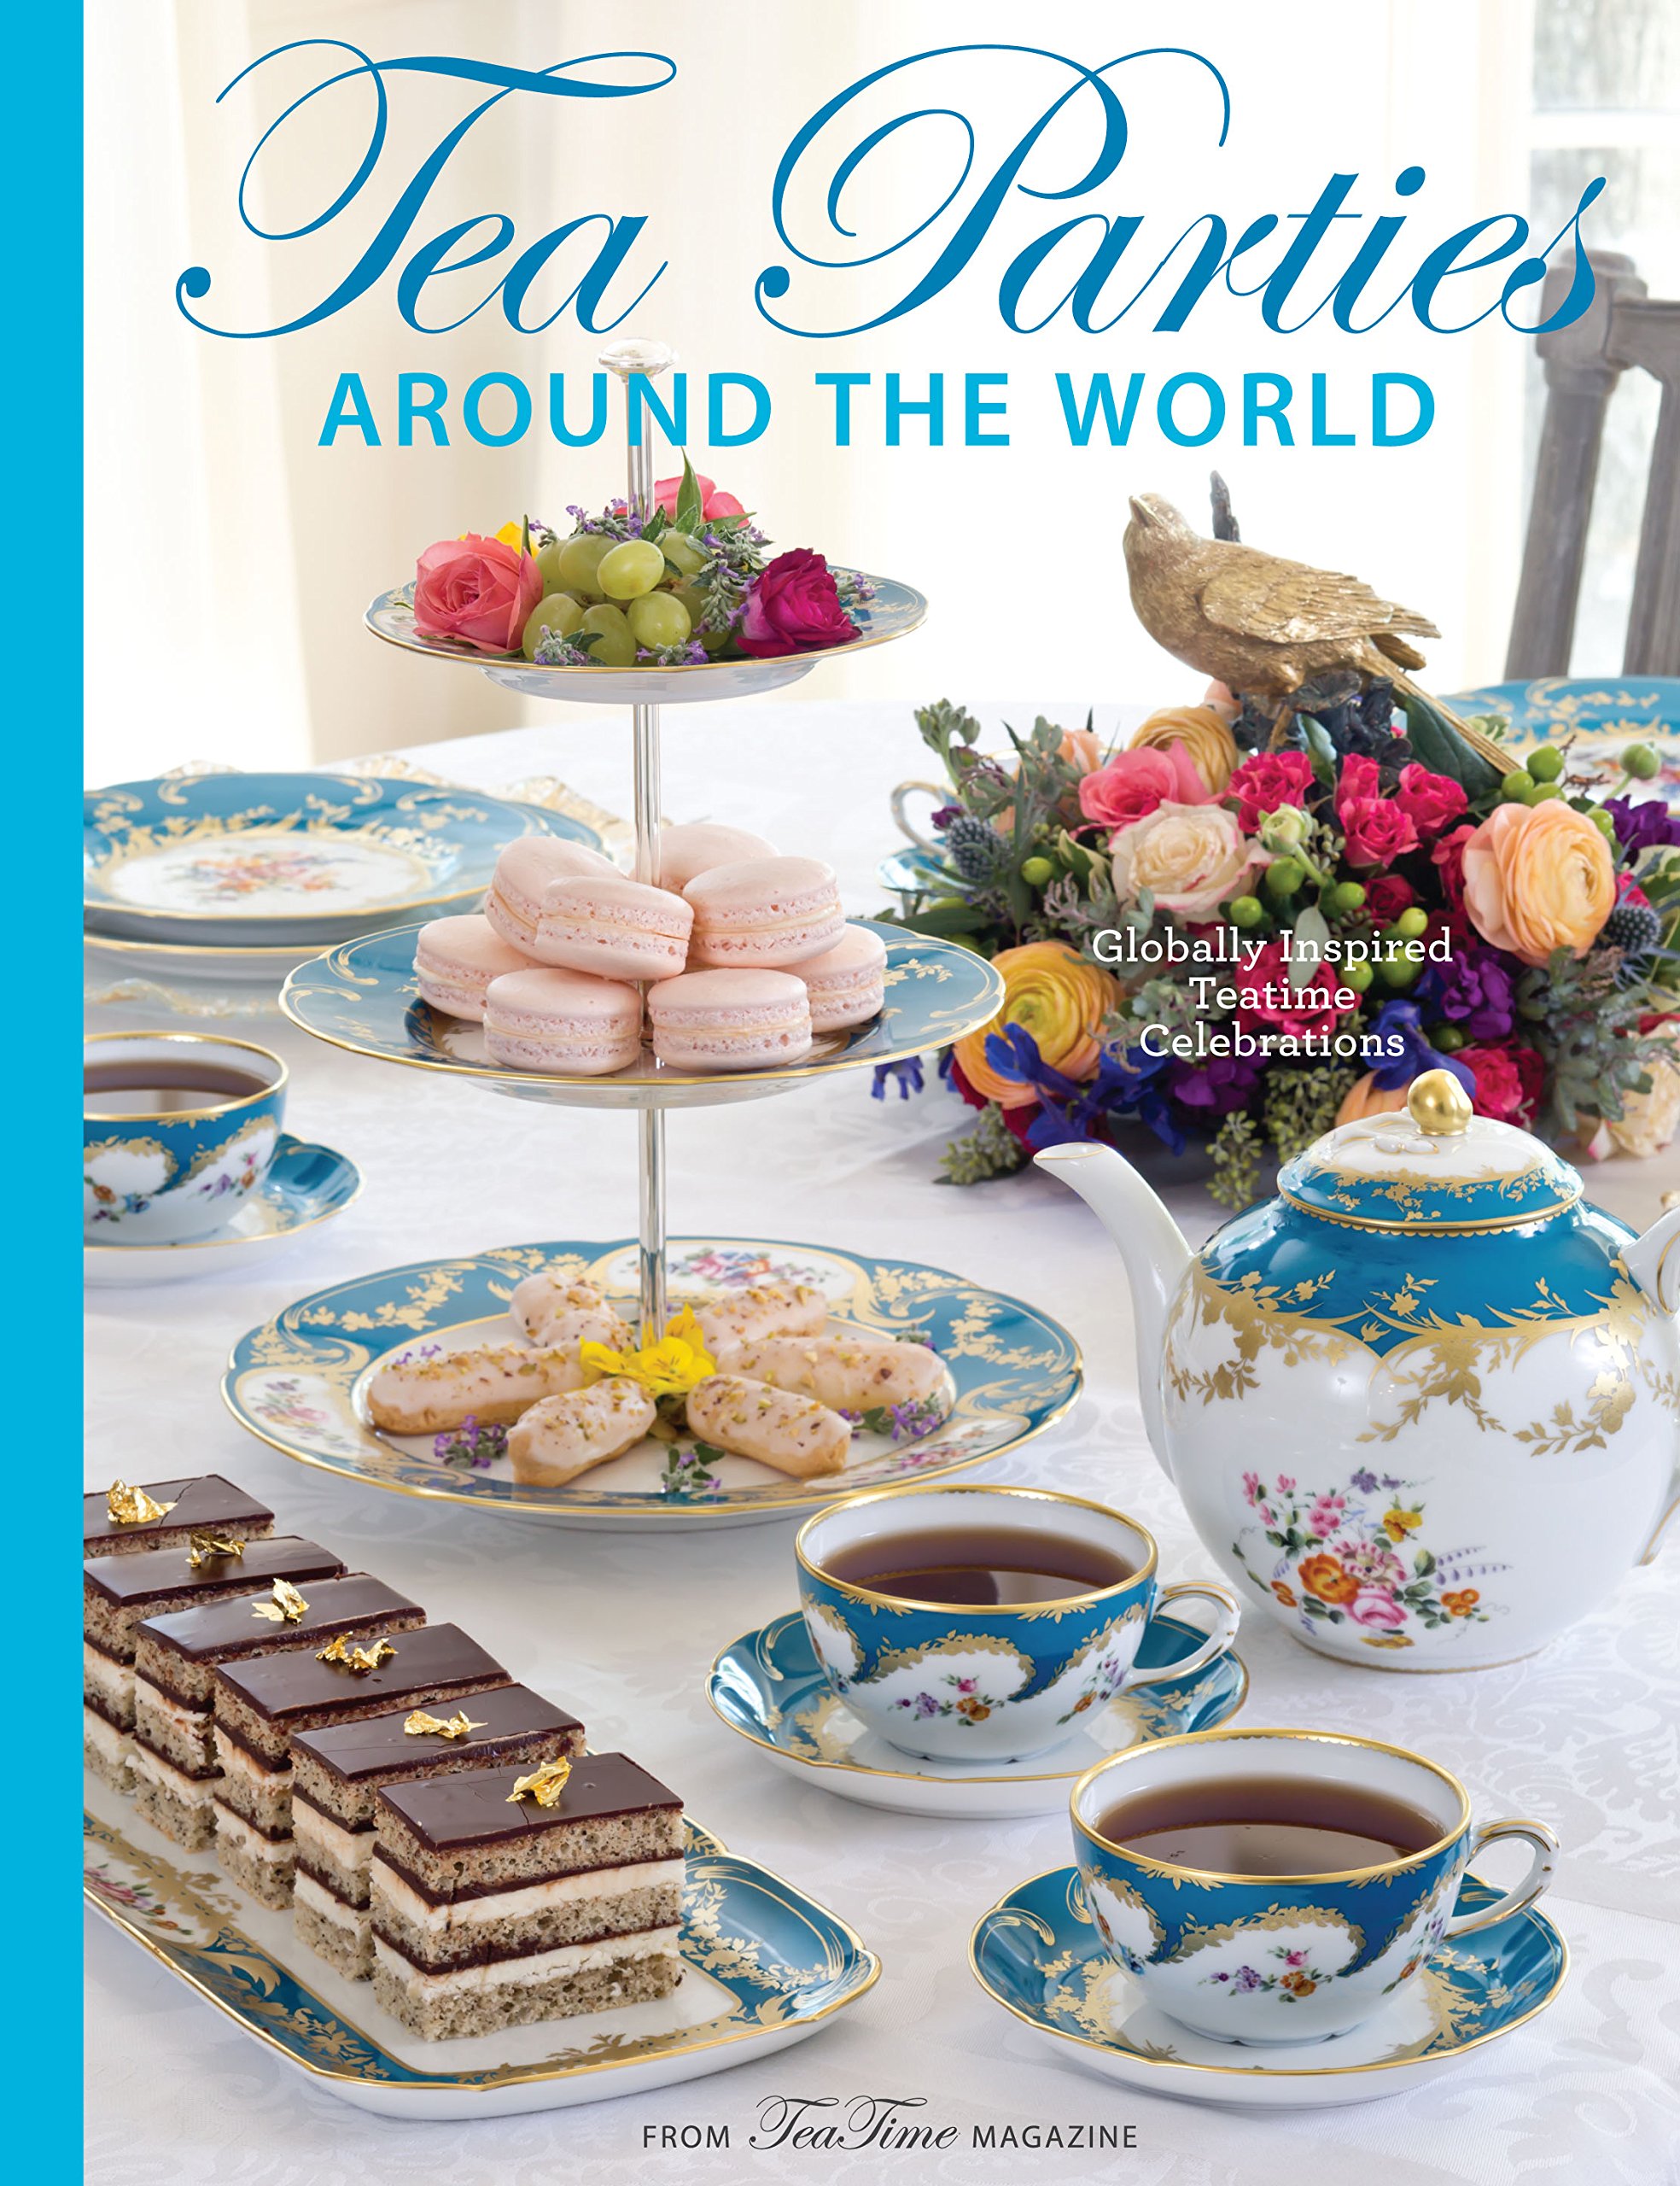 Image for "Tea Parties Around the World"